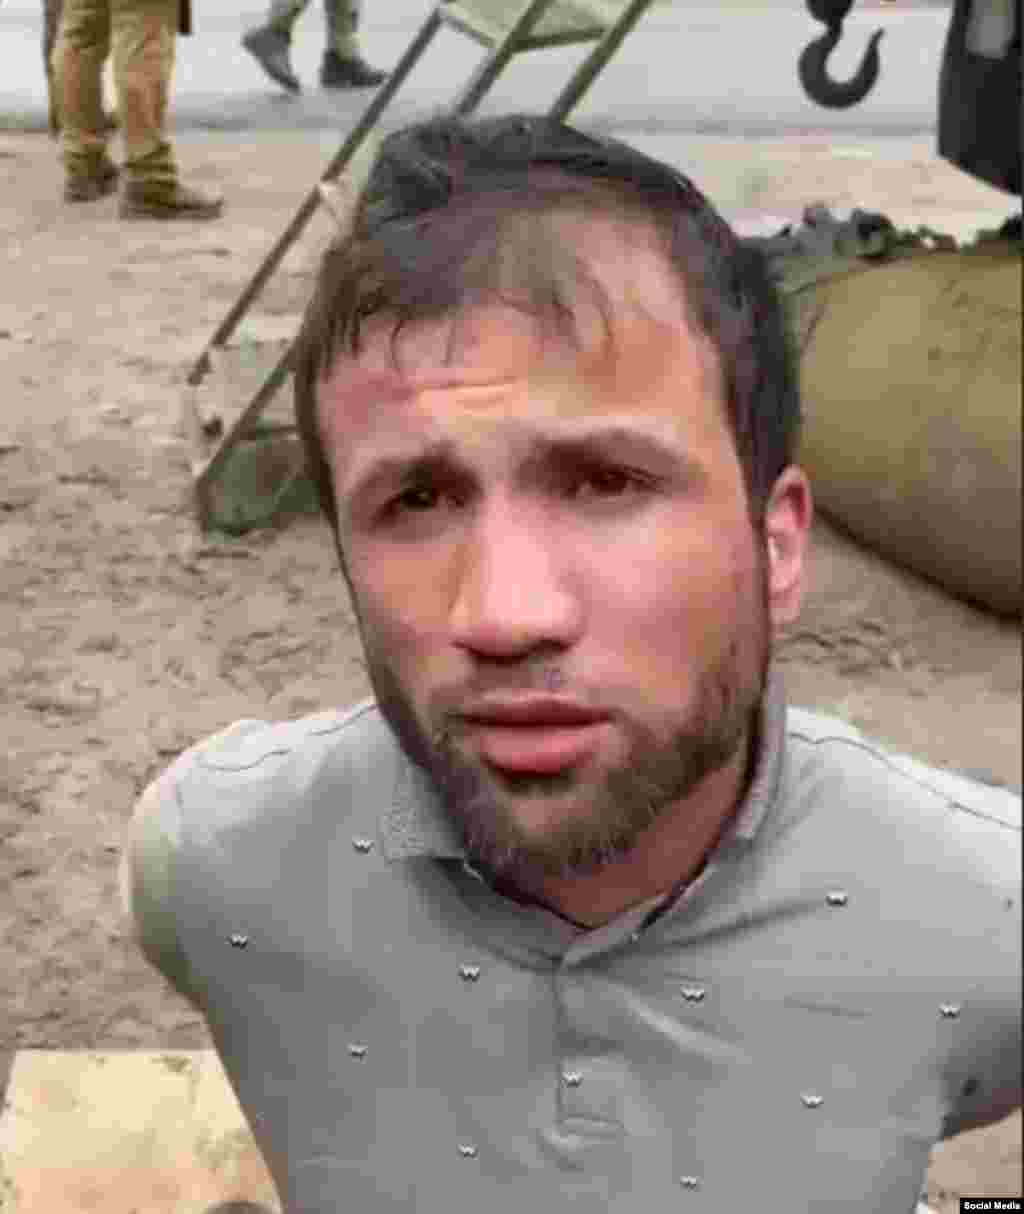 Faridun Shamsiddin is shown apparently unscathed immediately after his capture in the Bryansk region on March 23.&nbsp;